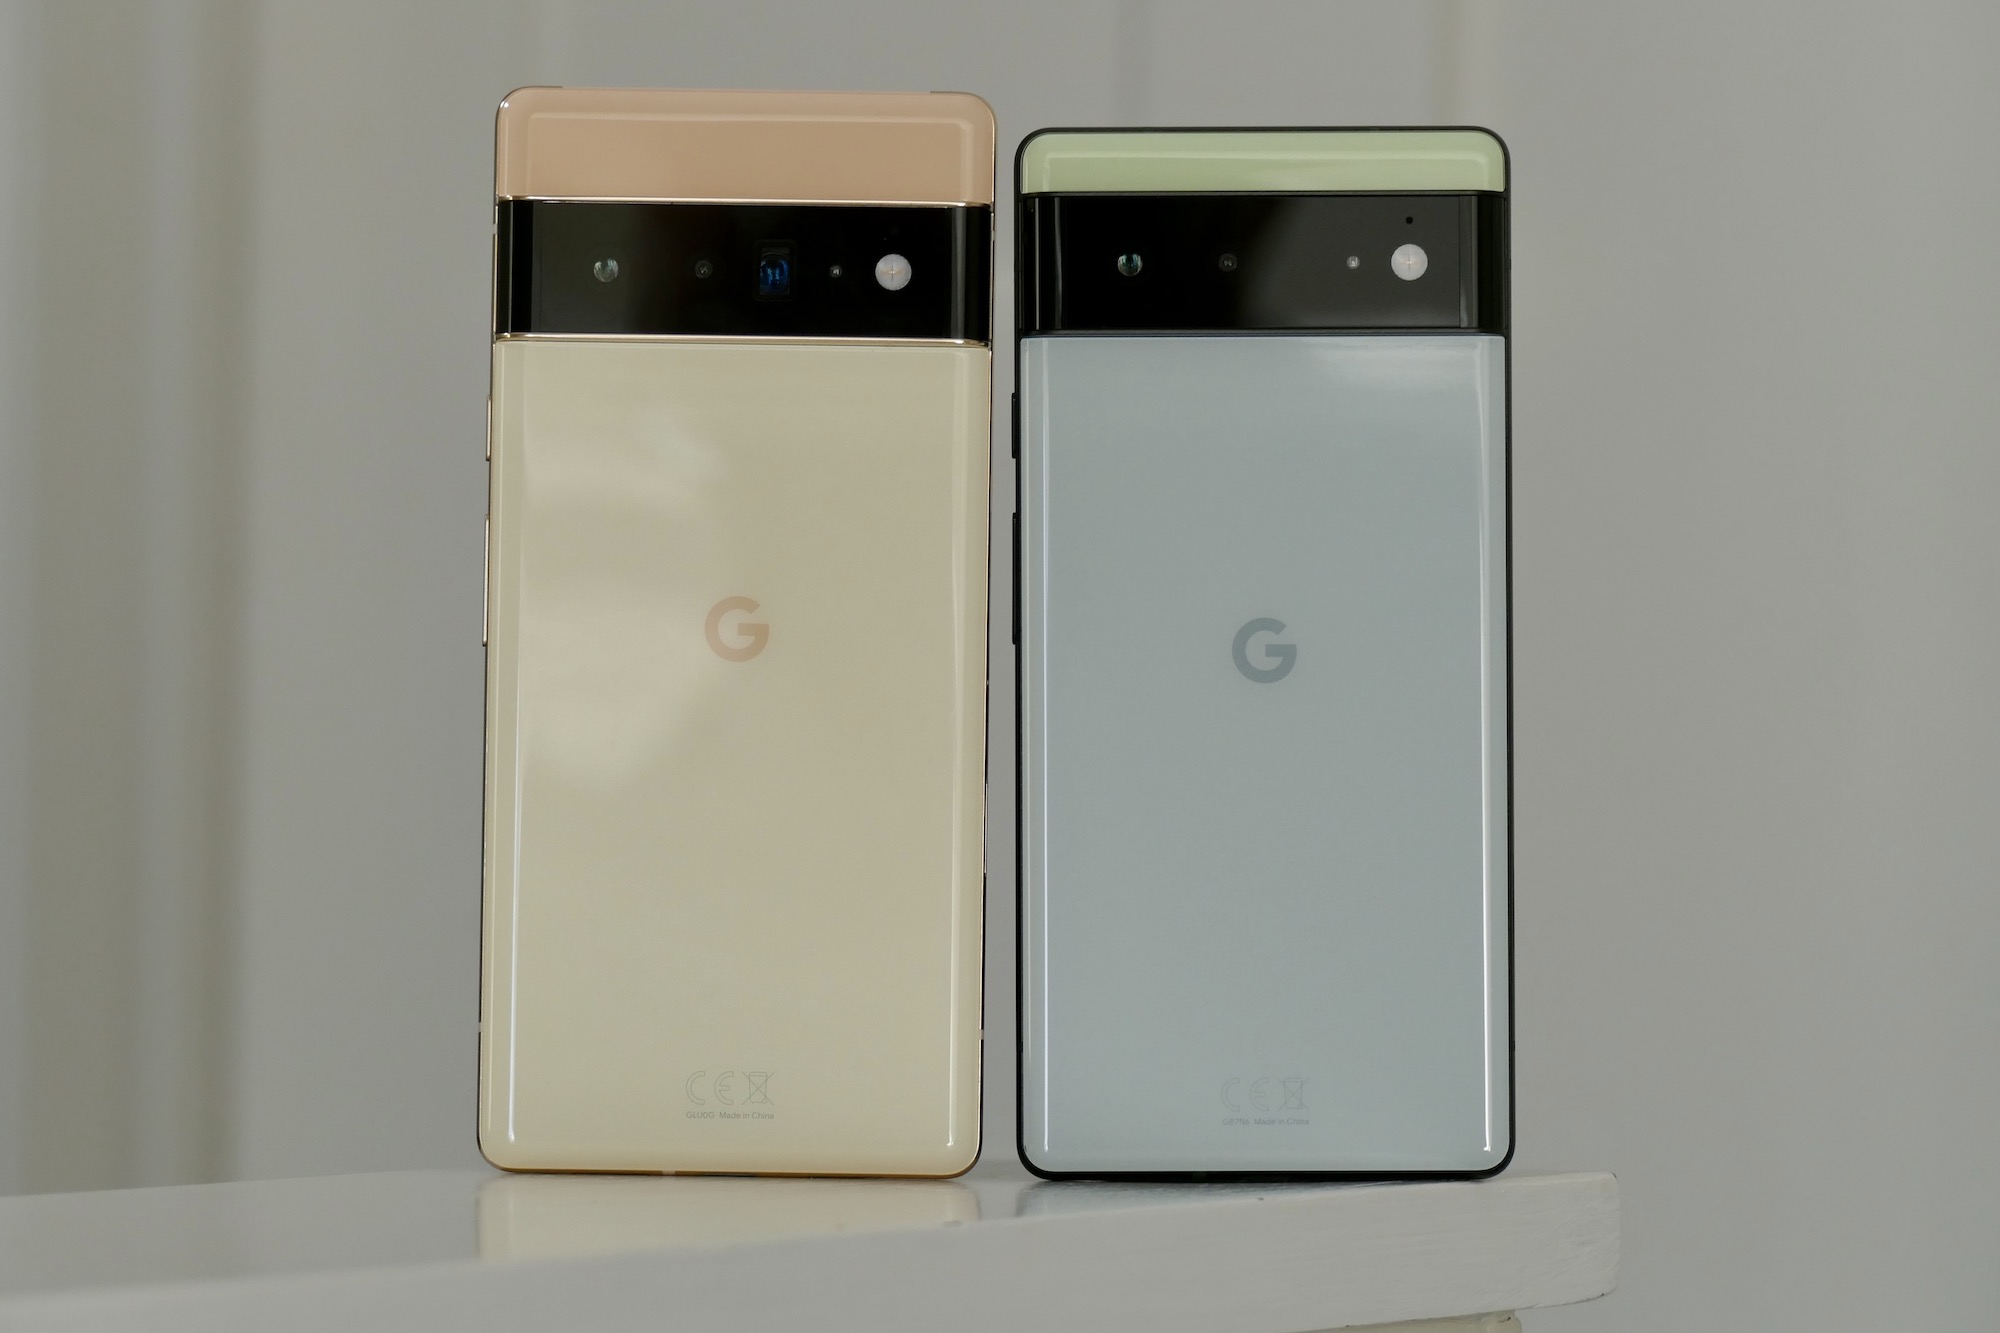 Pixel 6 Pro (left) and Pixel 6 (right).